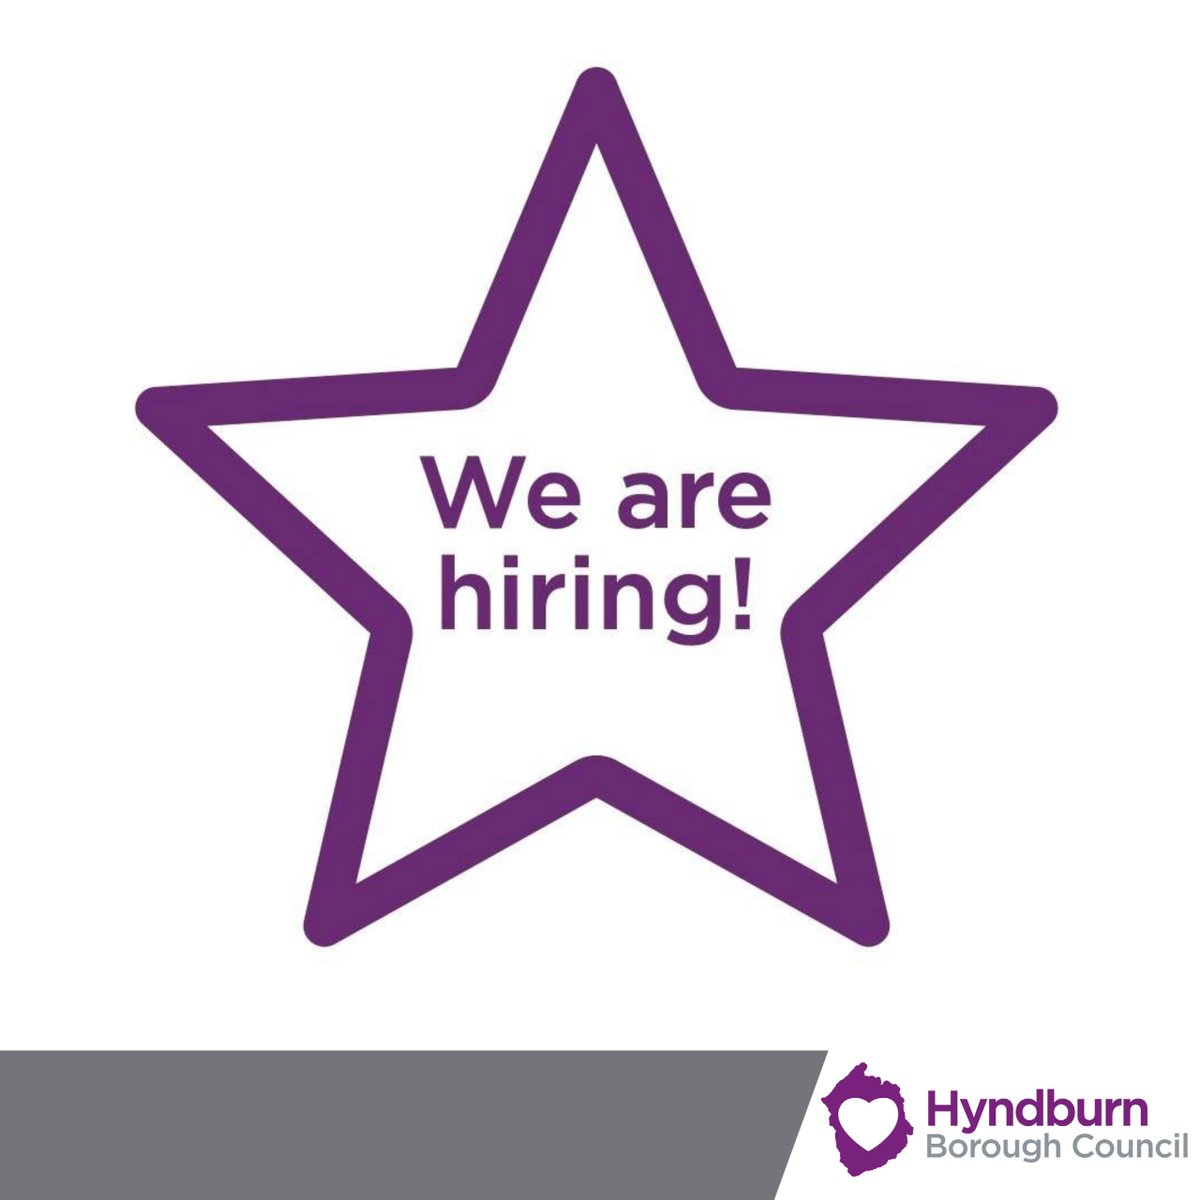 👋Looking for a new job? We'd love to hear from you

▪️Market Porter- 24hrs p/wk - £23,500 (pro rata)- Fixed Term
▪️HR Officer- 30 hrs p/wk - £34,834 - £36,648 (pro rata)
▪️Housing Advice & Homelessness Officer- 37hrs p/wk - £29,269 - £31,364

👉Full info: hyndburnbc.gov.uk/working-at-the…